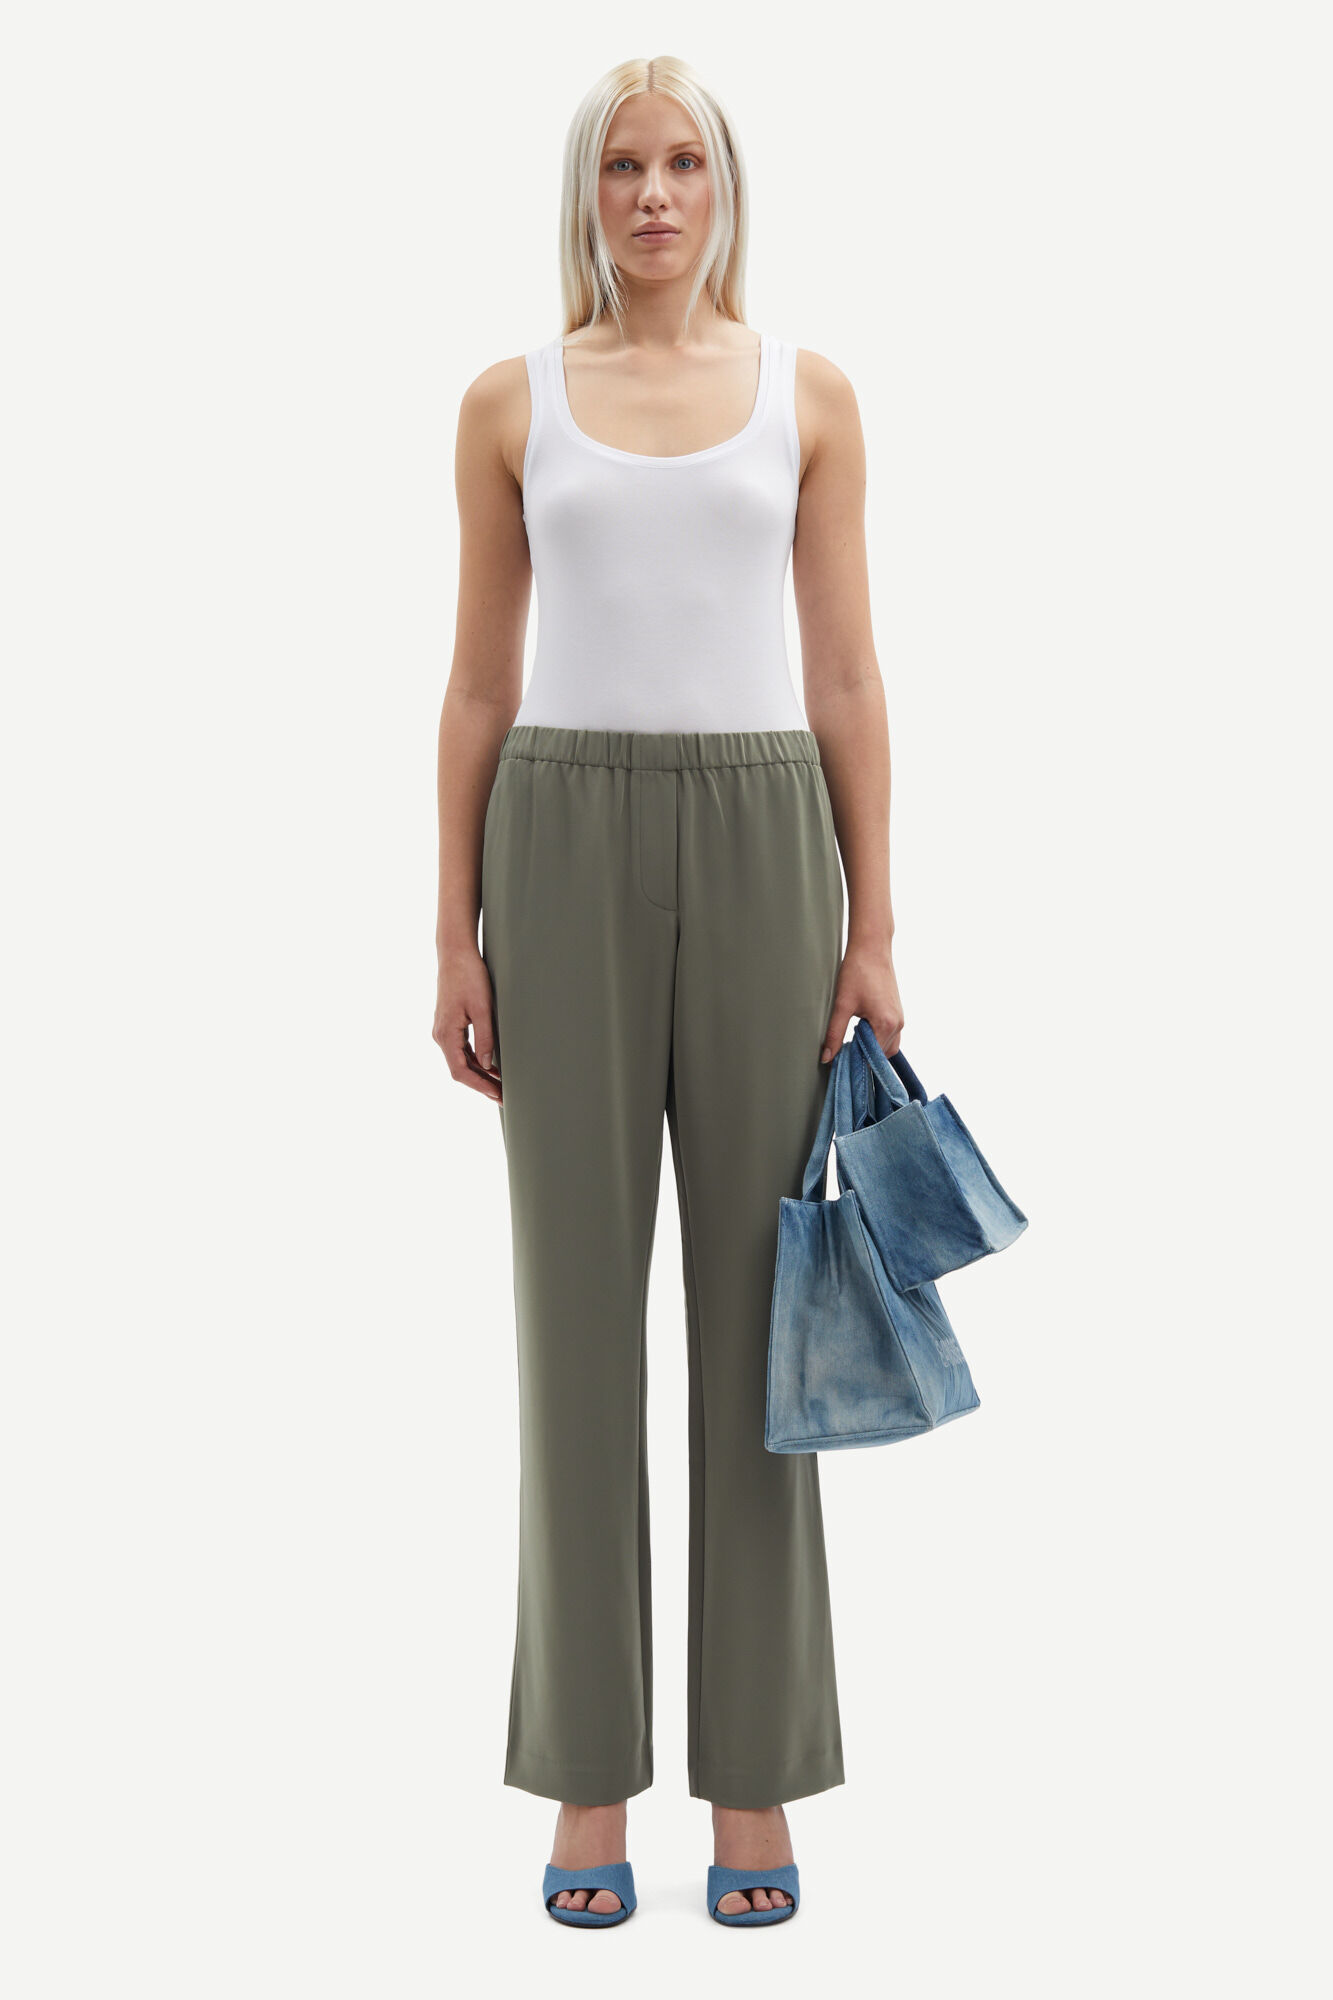 Women's Linen Trousers Plain Fitted Summer Trousers with Pockets High Waist  Cotton Linen Palazzo Trousers Straight Lightweight Harem Pants for Women Uk  Casual Capri Trousers Ladies Trousers : Amazon.co.uk: Fashion